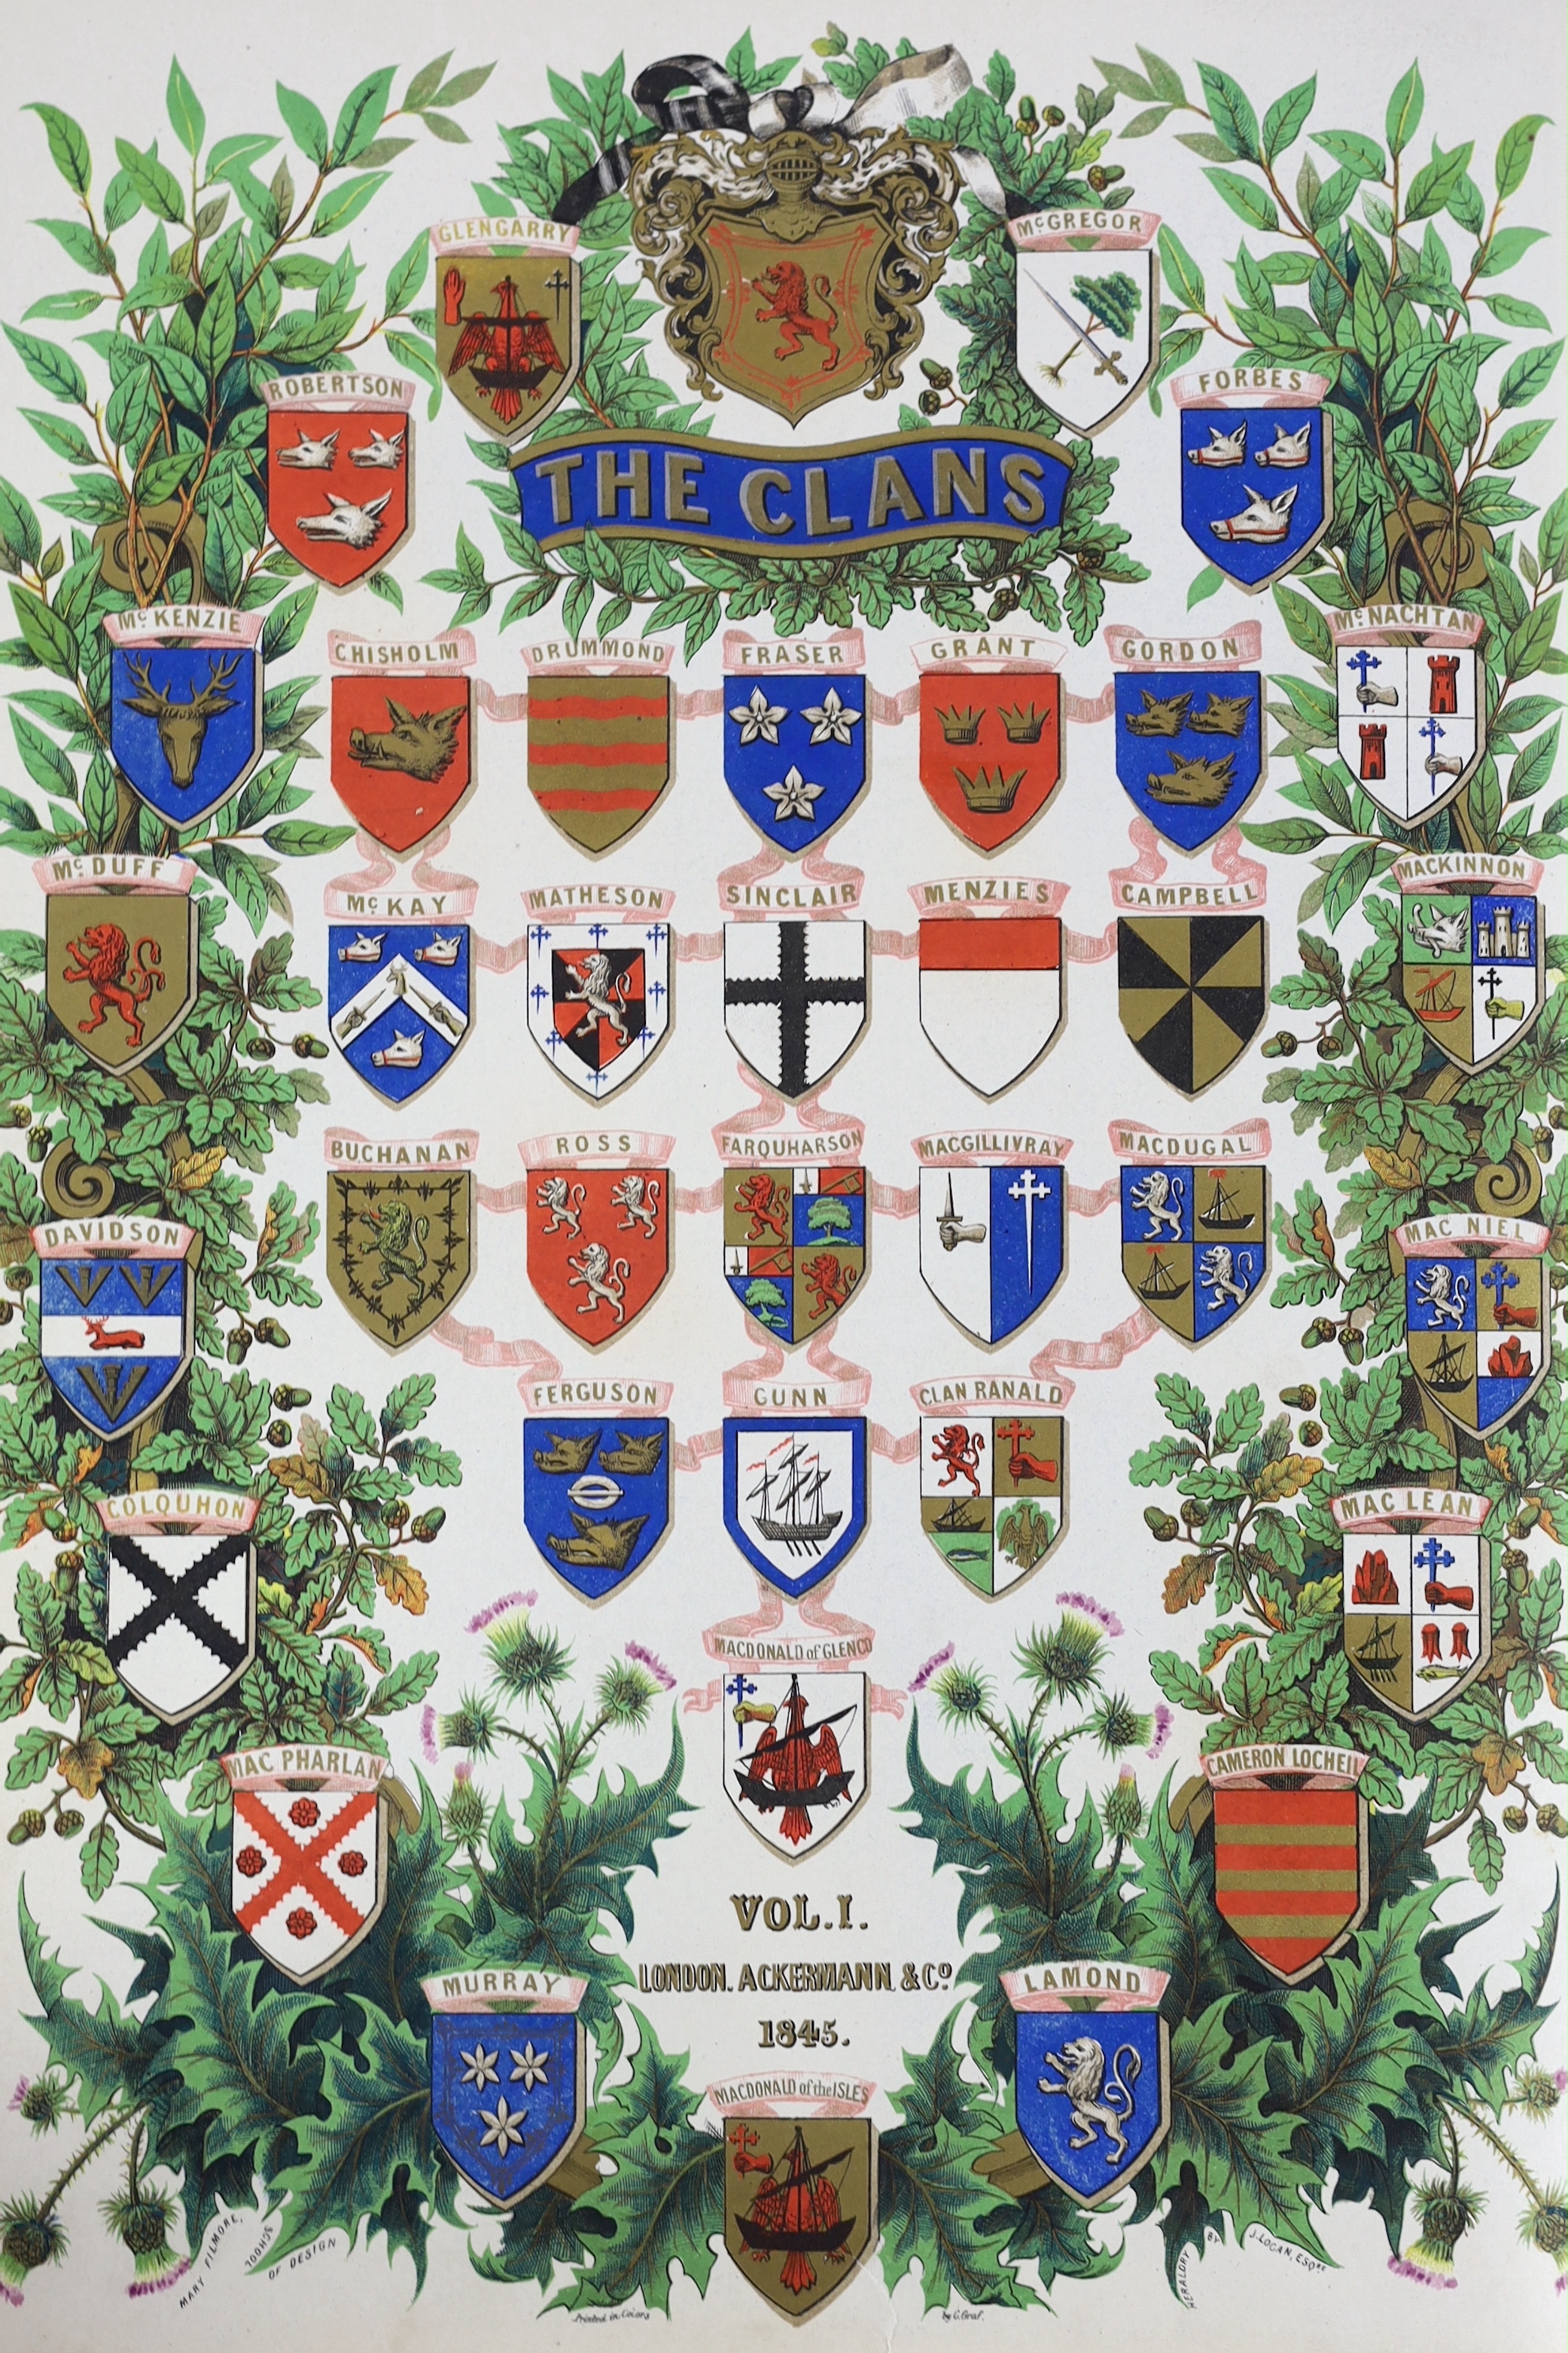 Logan, James (1794-1872) - The Clans of the Scottish Highlands, illustrated by appropriate figures displaying their Dress, Tartans, Arms, Armorial Insignia, and Social Occupations, 2 vols